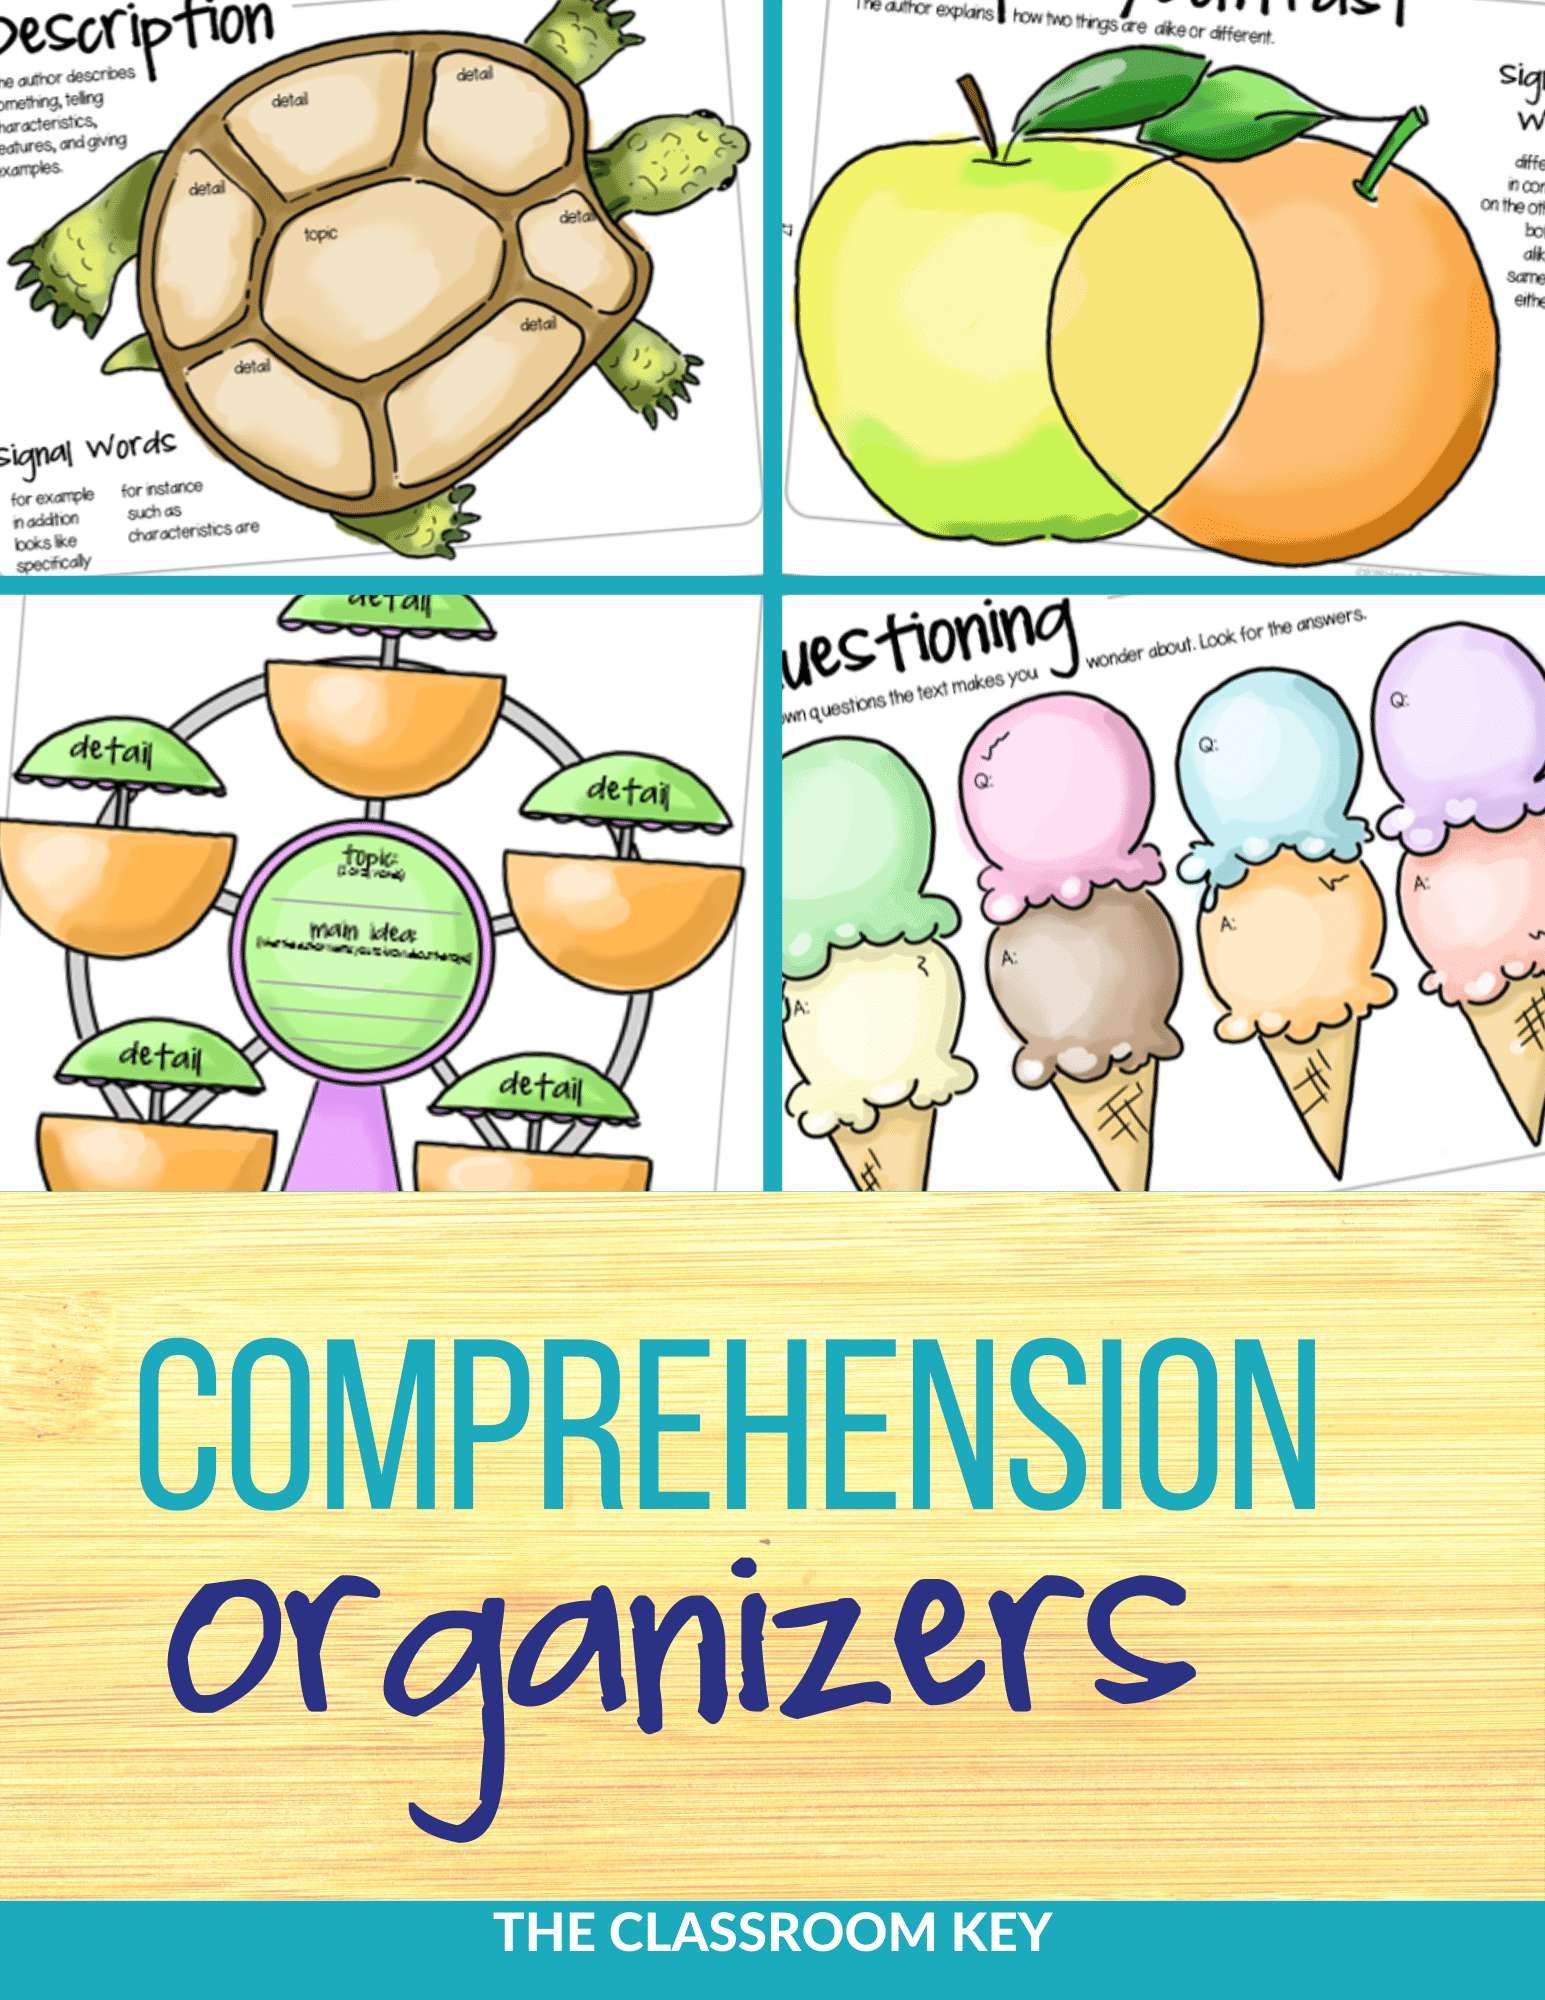 It's easy to teach a reading comprehension lesson for any text with this collection of graphic organizers. Designed to meet all literature and informational text Common Core standards in 1st, 2nd, or 3rd grade. No prep, just print and go.